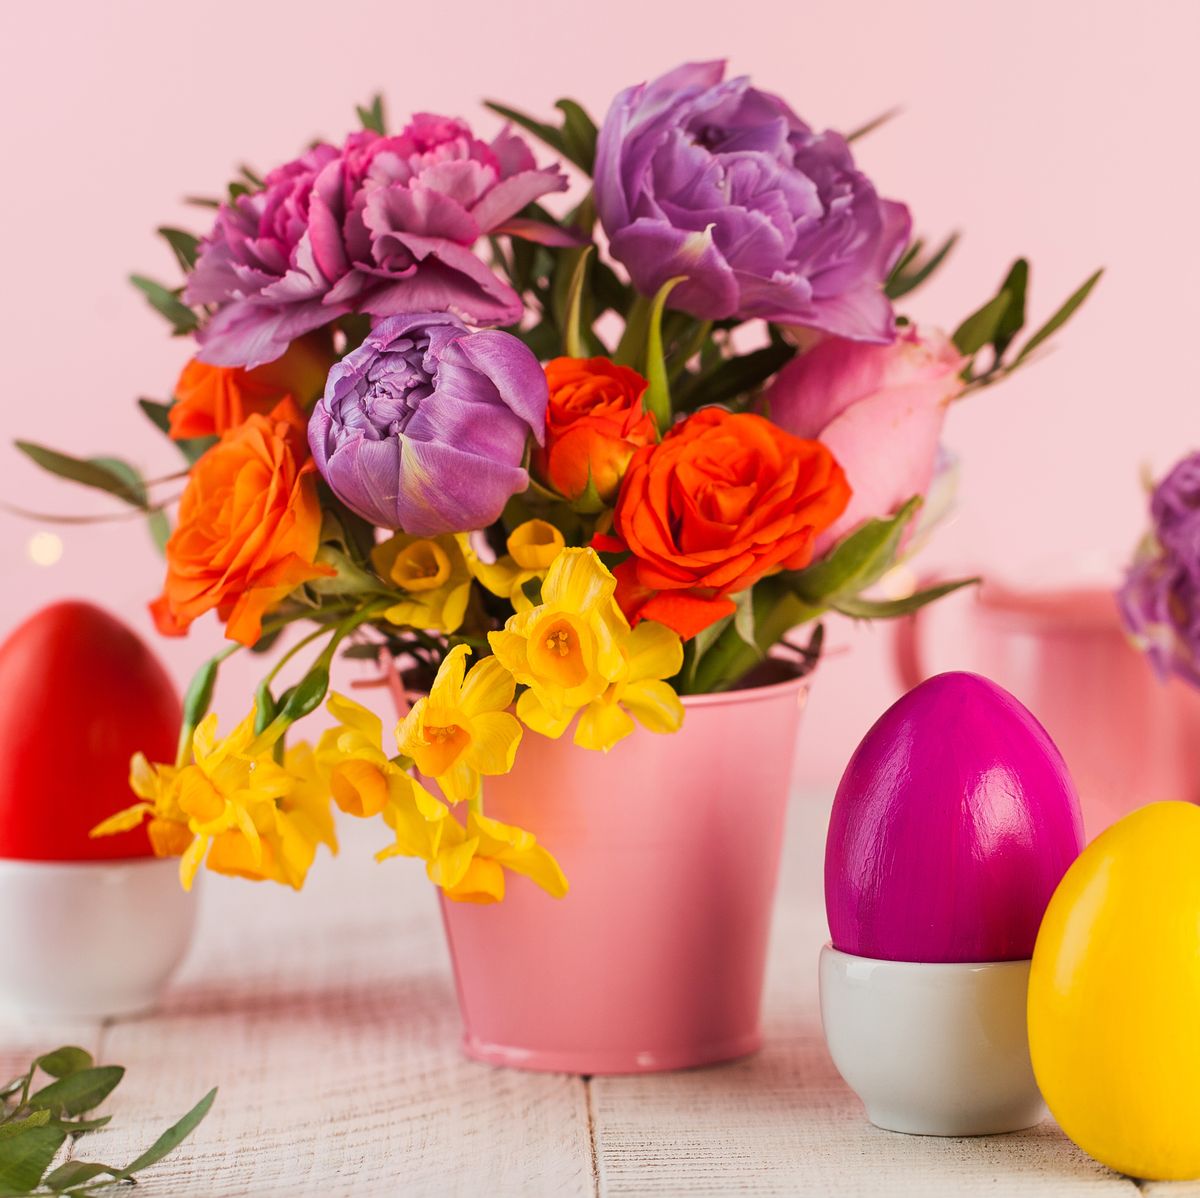 Easter Decorations Background Easter Eggs Spring Flowers Green